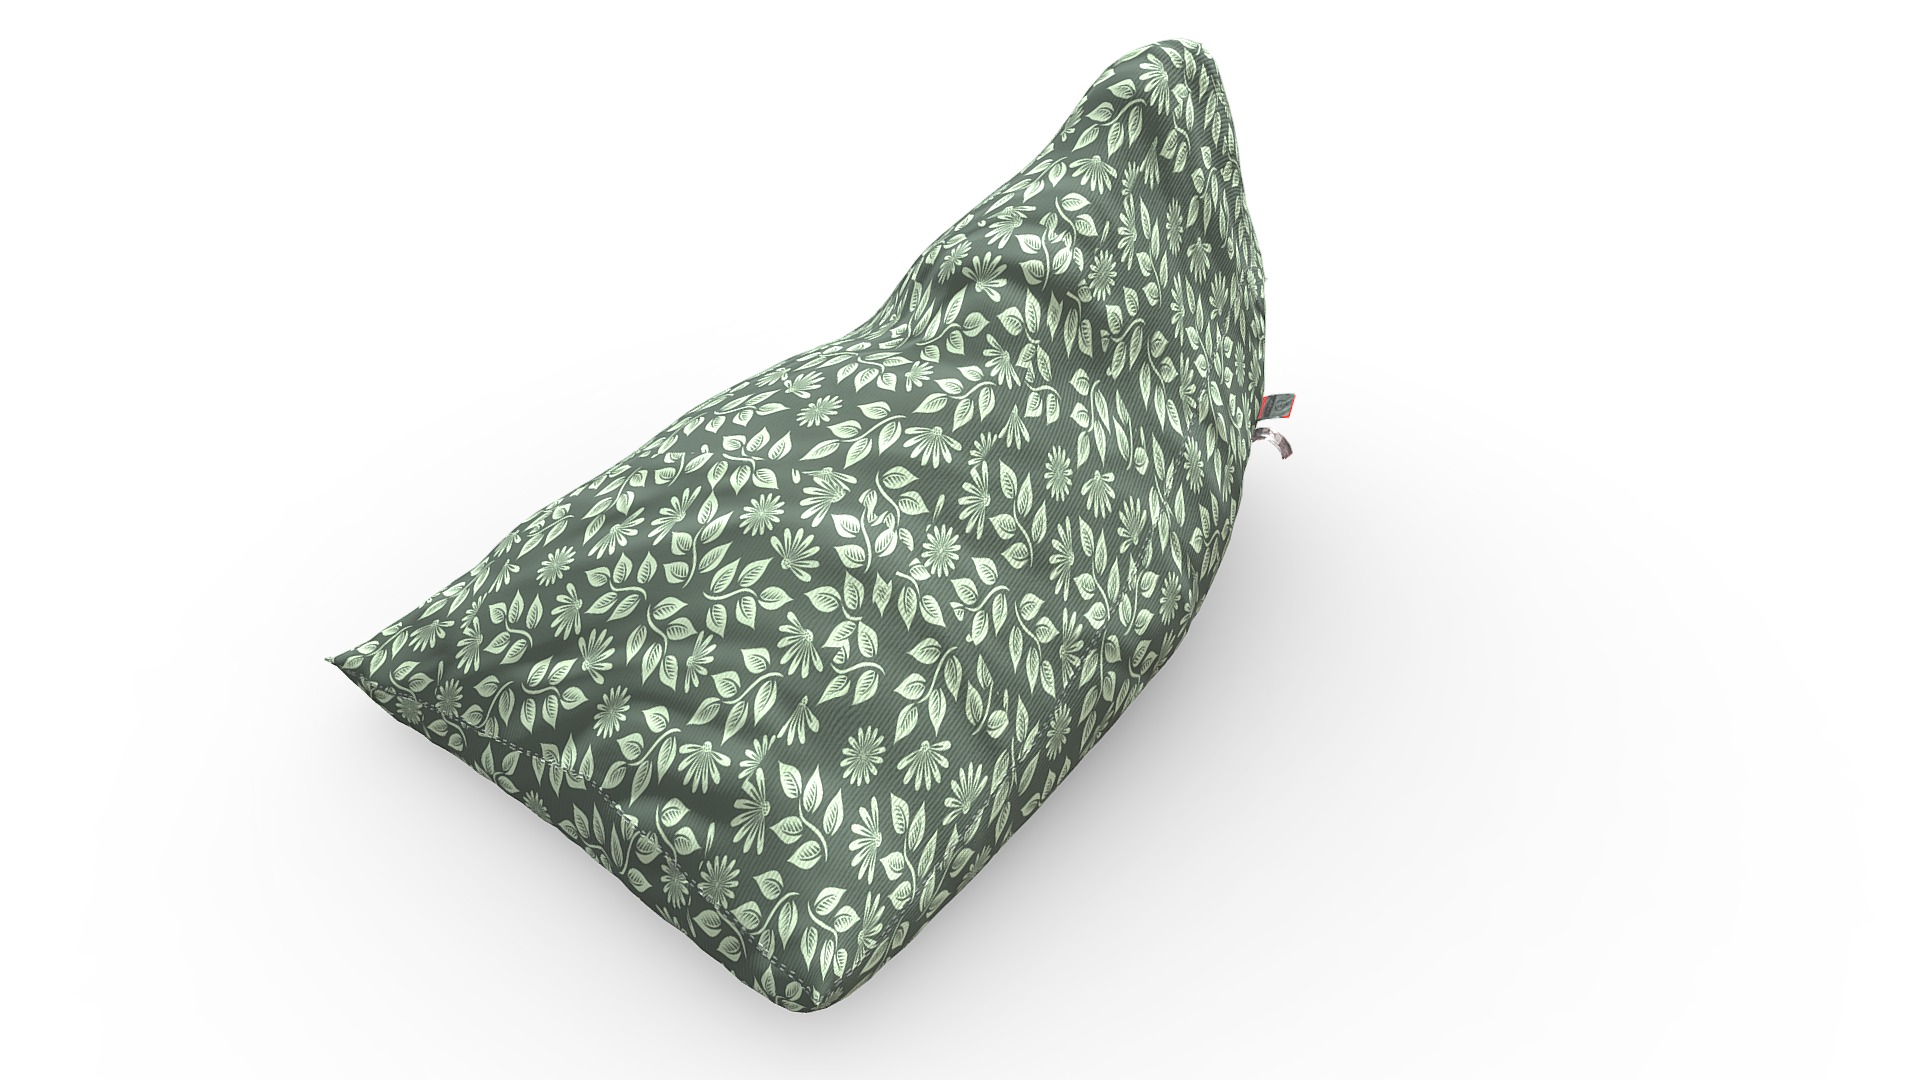 3D model Sack Bean Bag - This is a 3D model of the Sack Bean Bag. The 3D model is about a green and black patterned object.